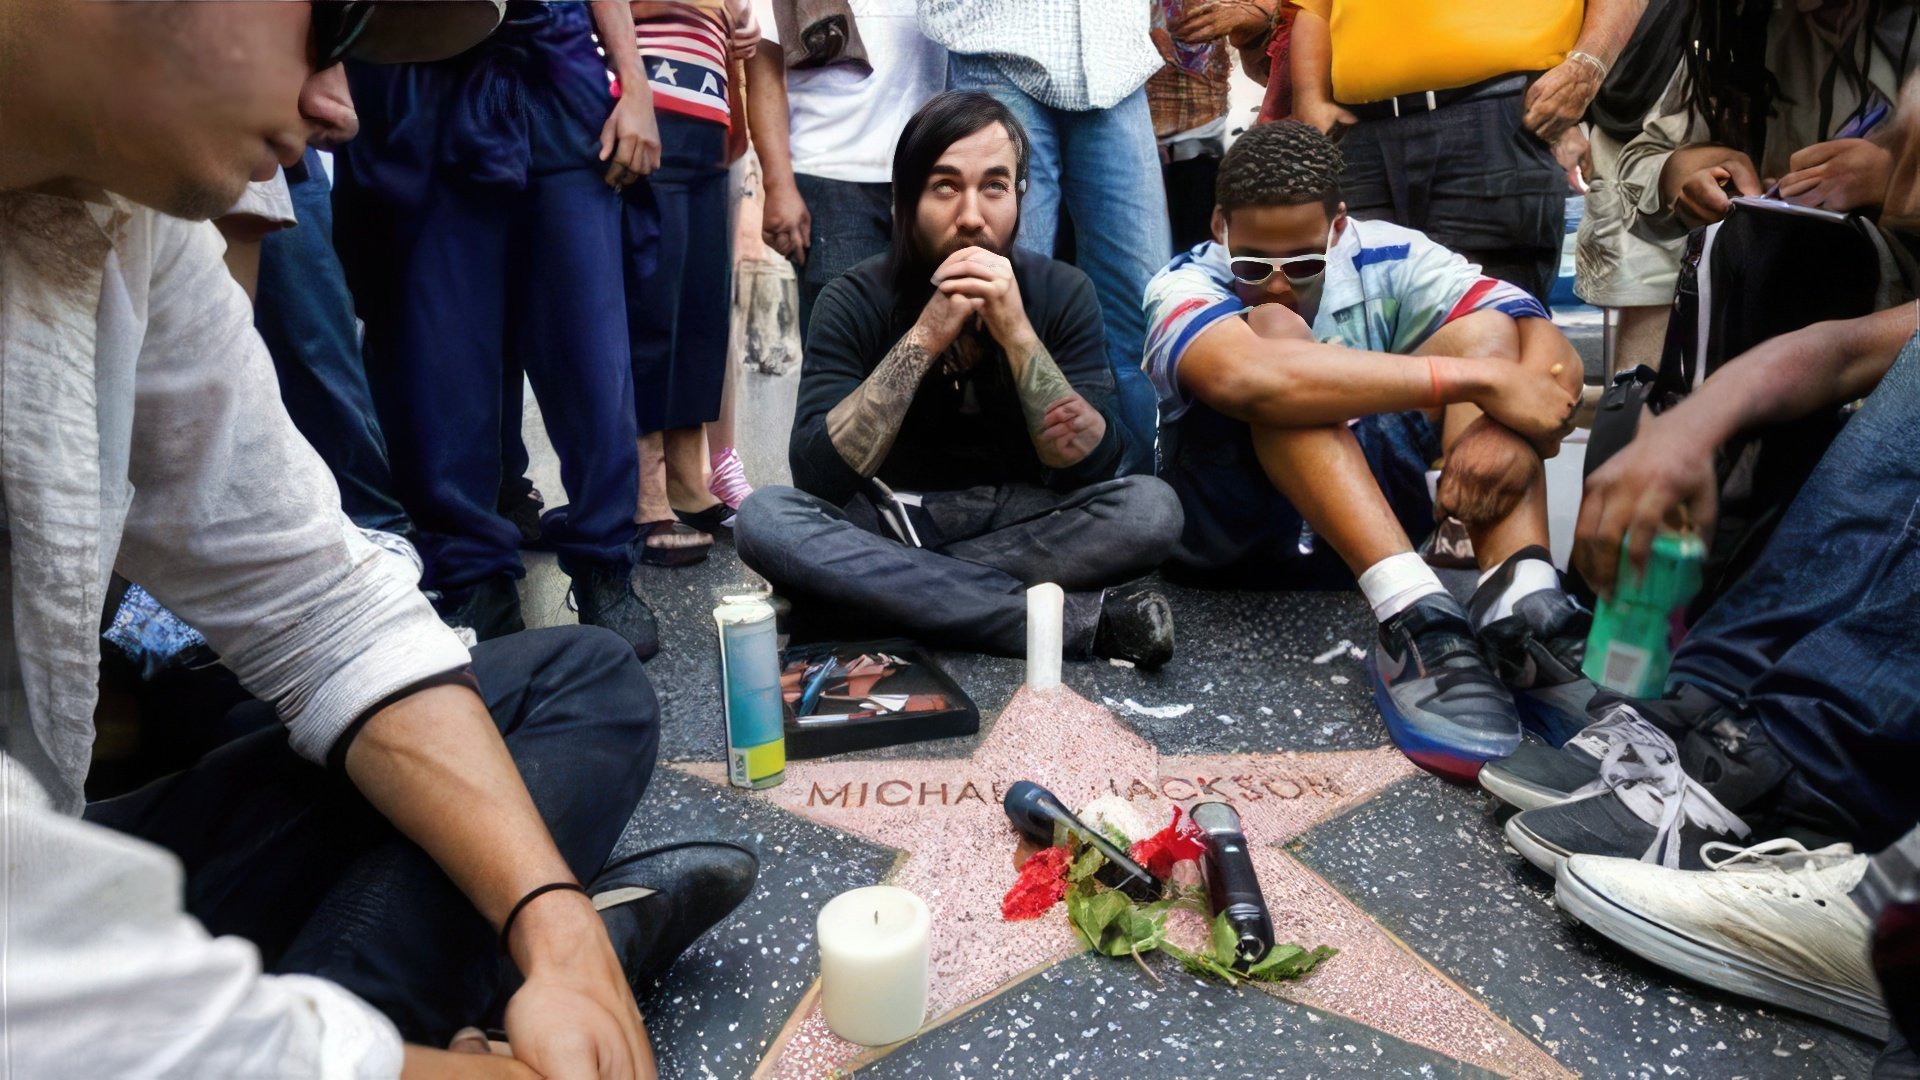 A minute of silence at Michael Jackson's star on the Walk of Fame